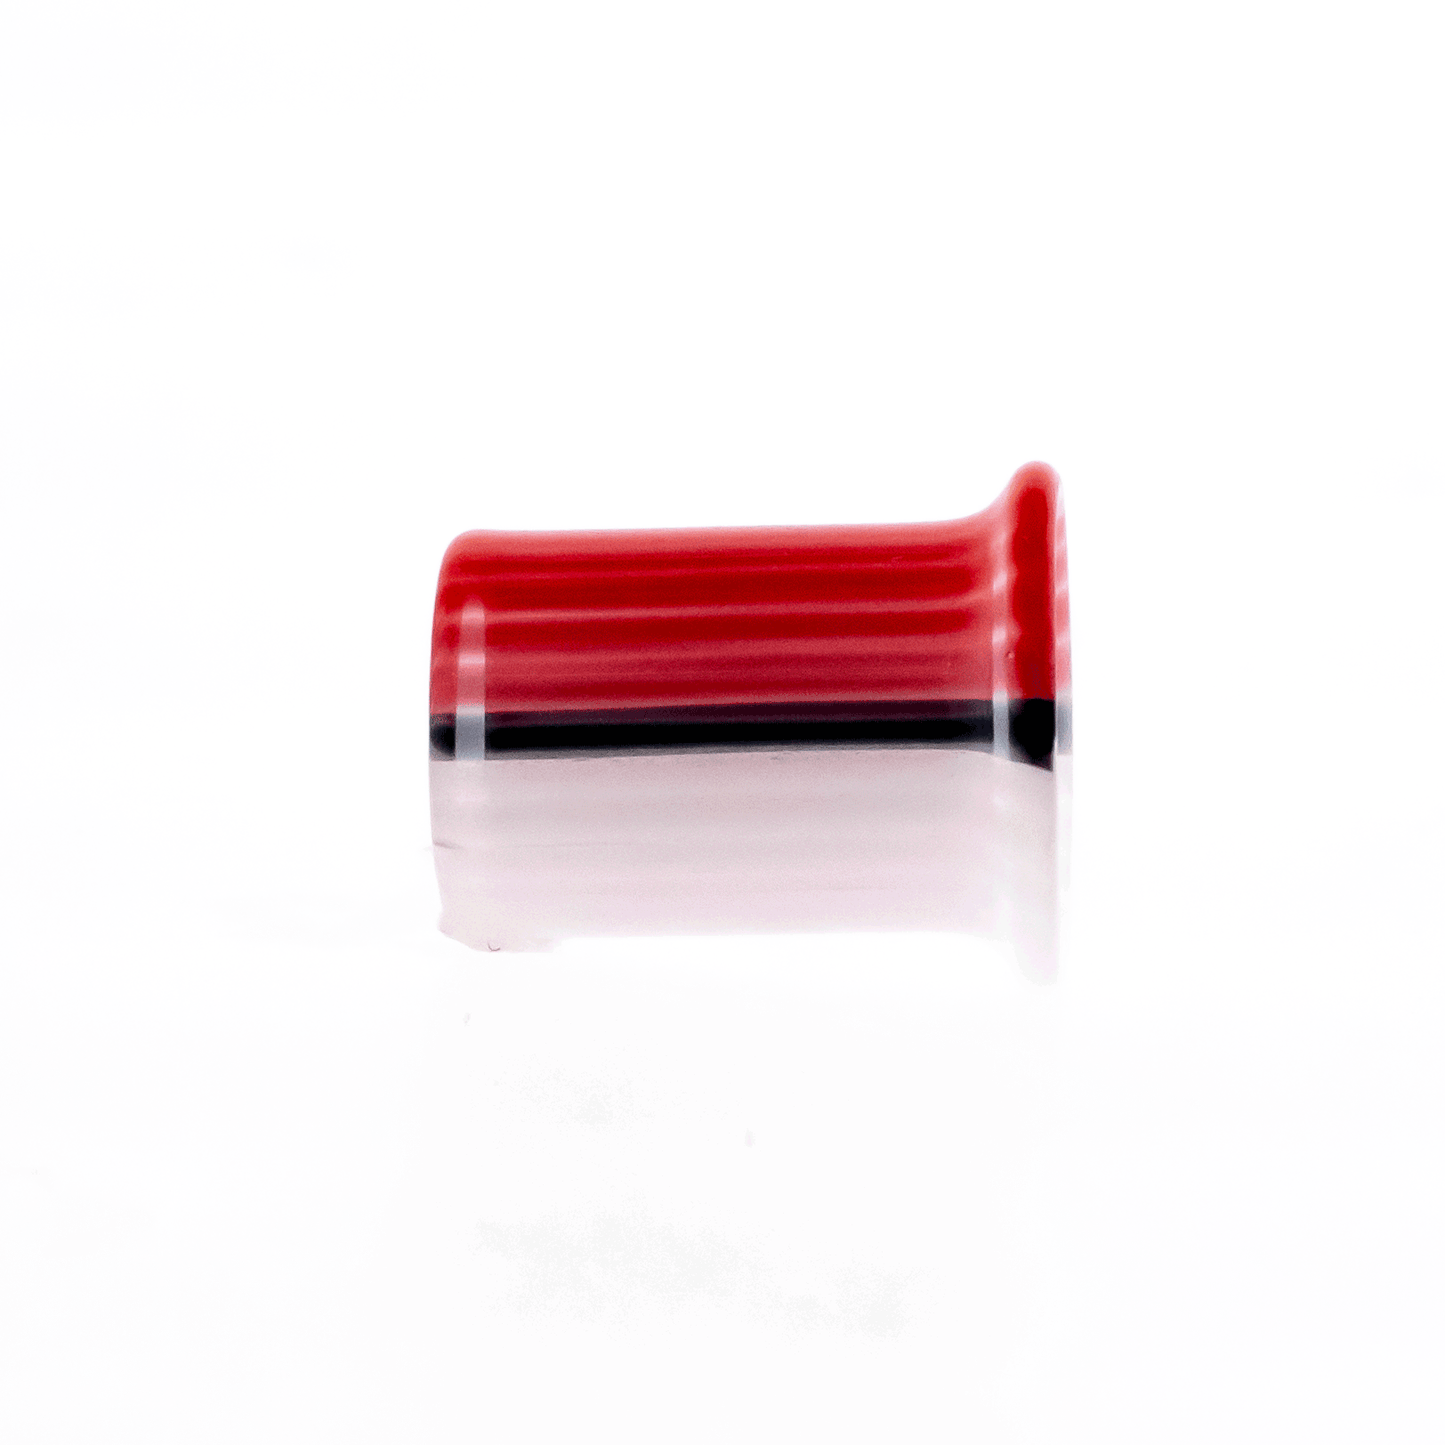 Pair Red and White Ball Glass Single Flare Tunnels